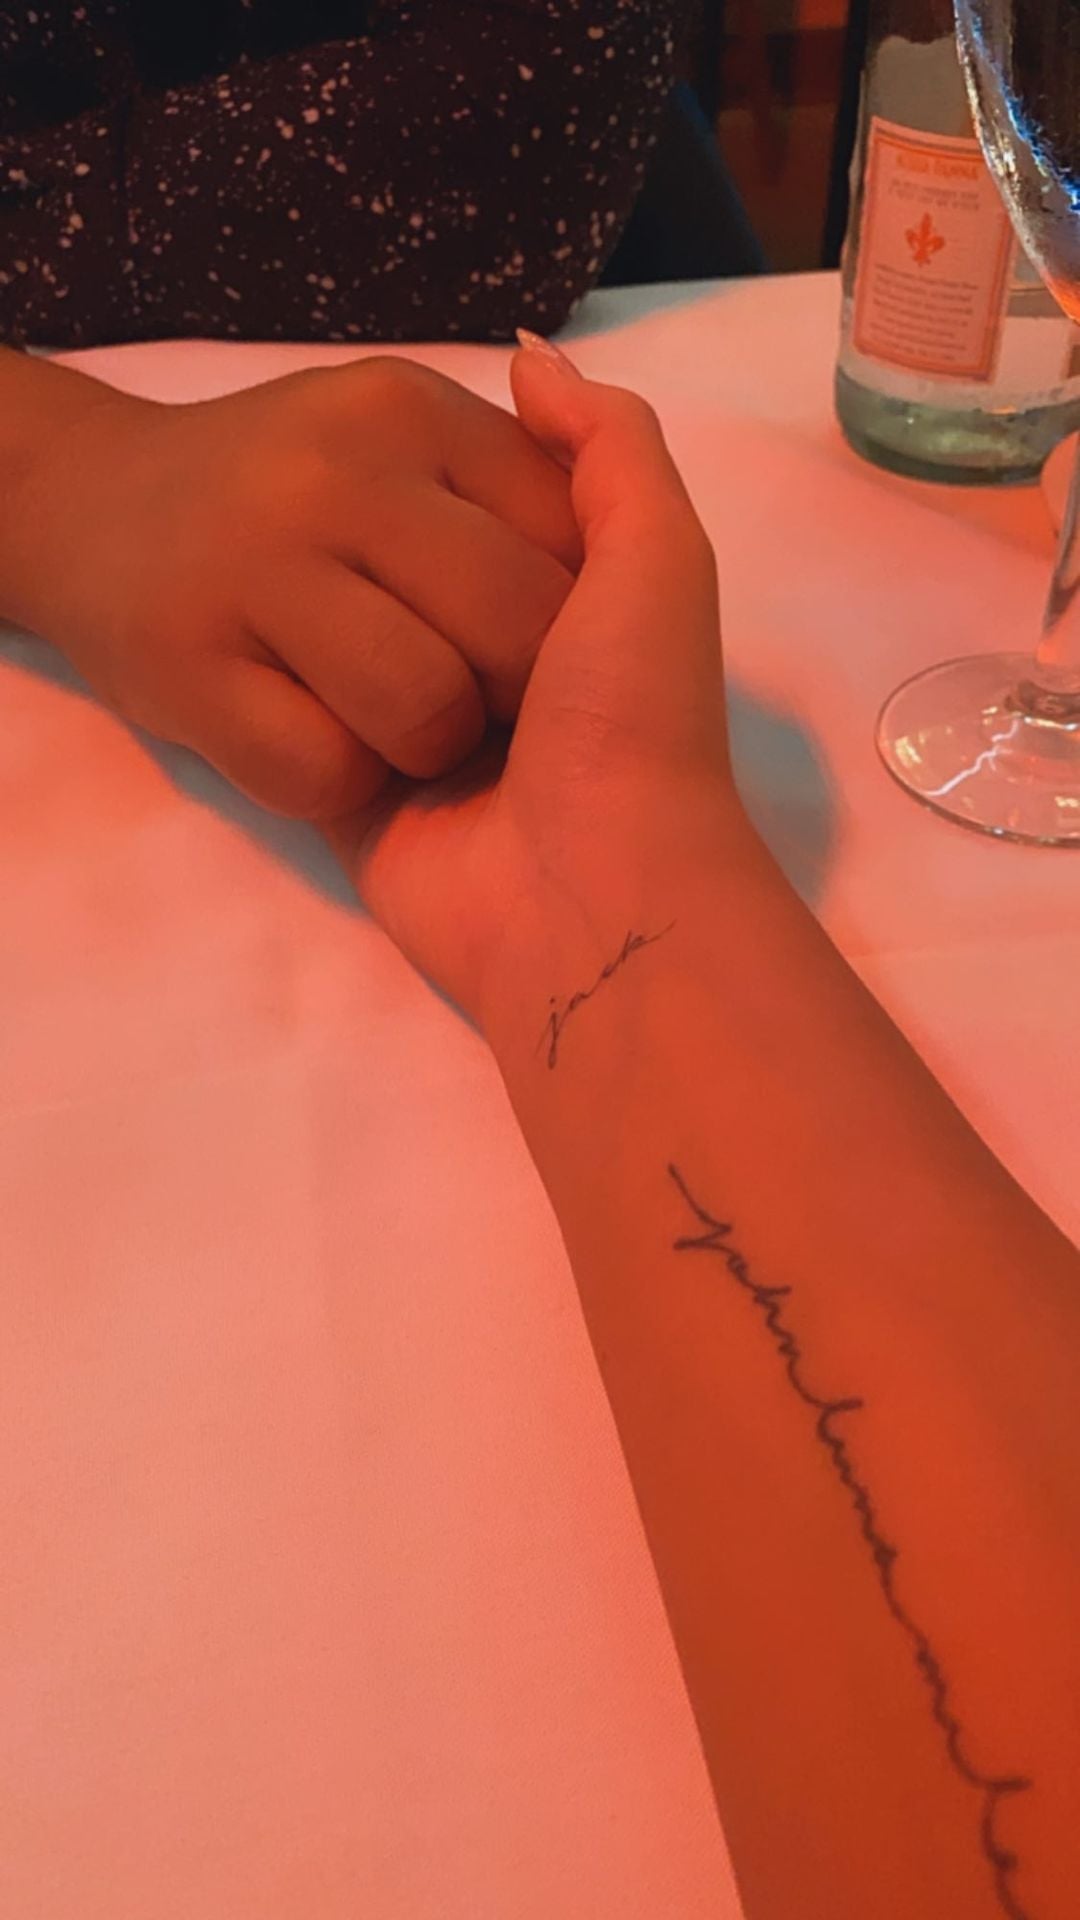 Shawn Mendes gets new tattoo in honor of his sister Aaliyah